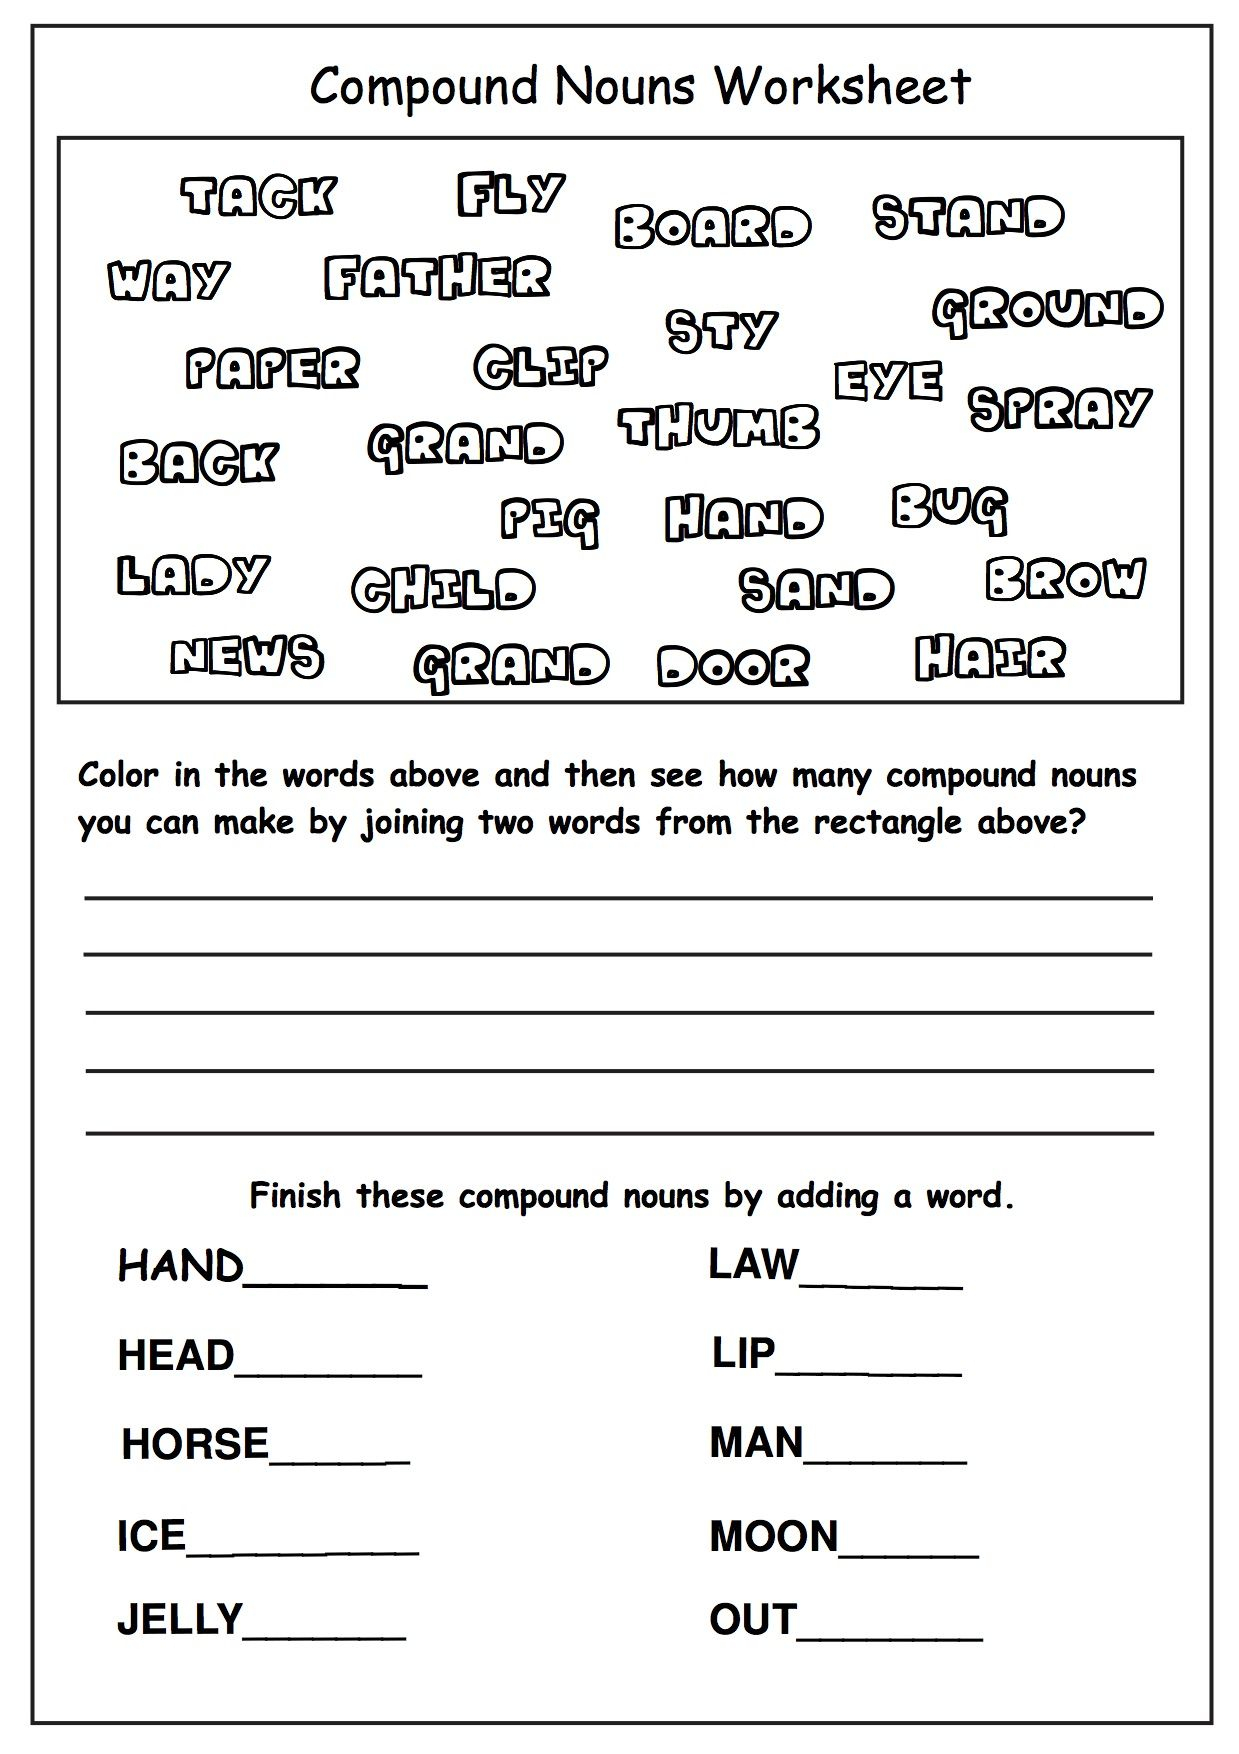 Compound Nouns - Print Out A Free Compound Worksheet And